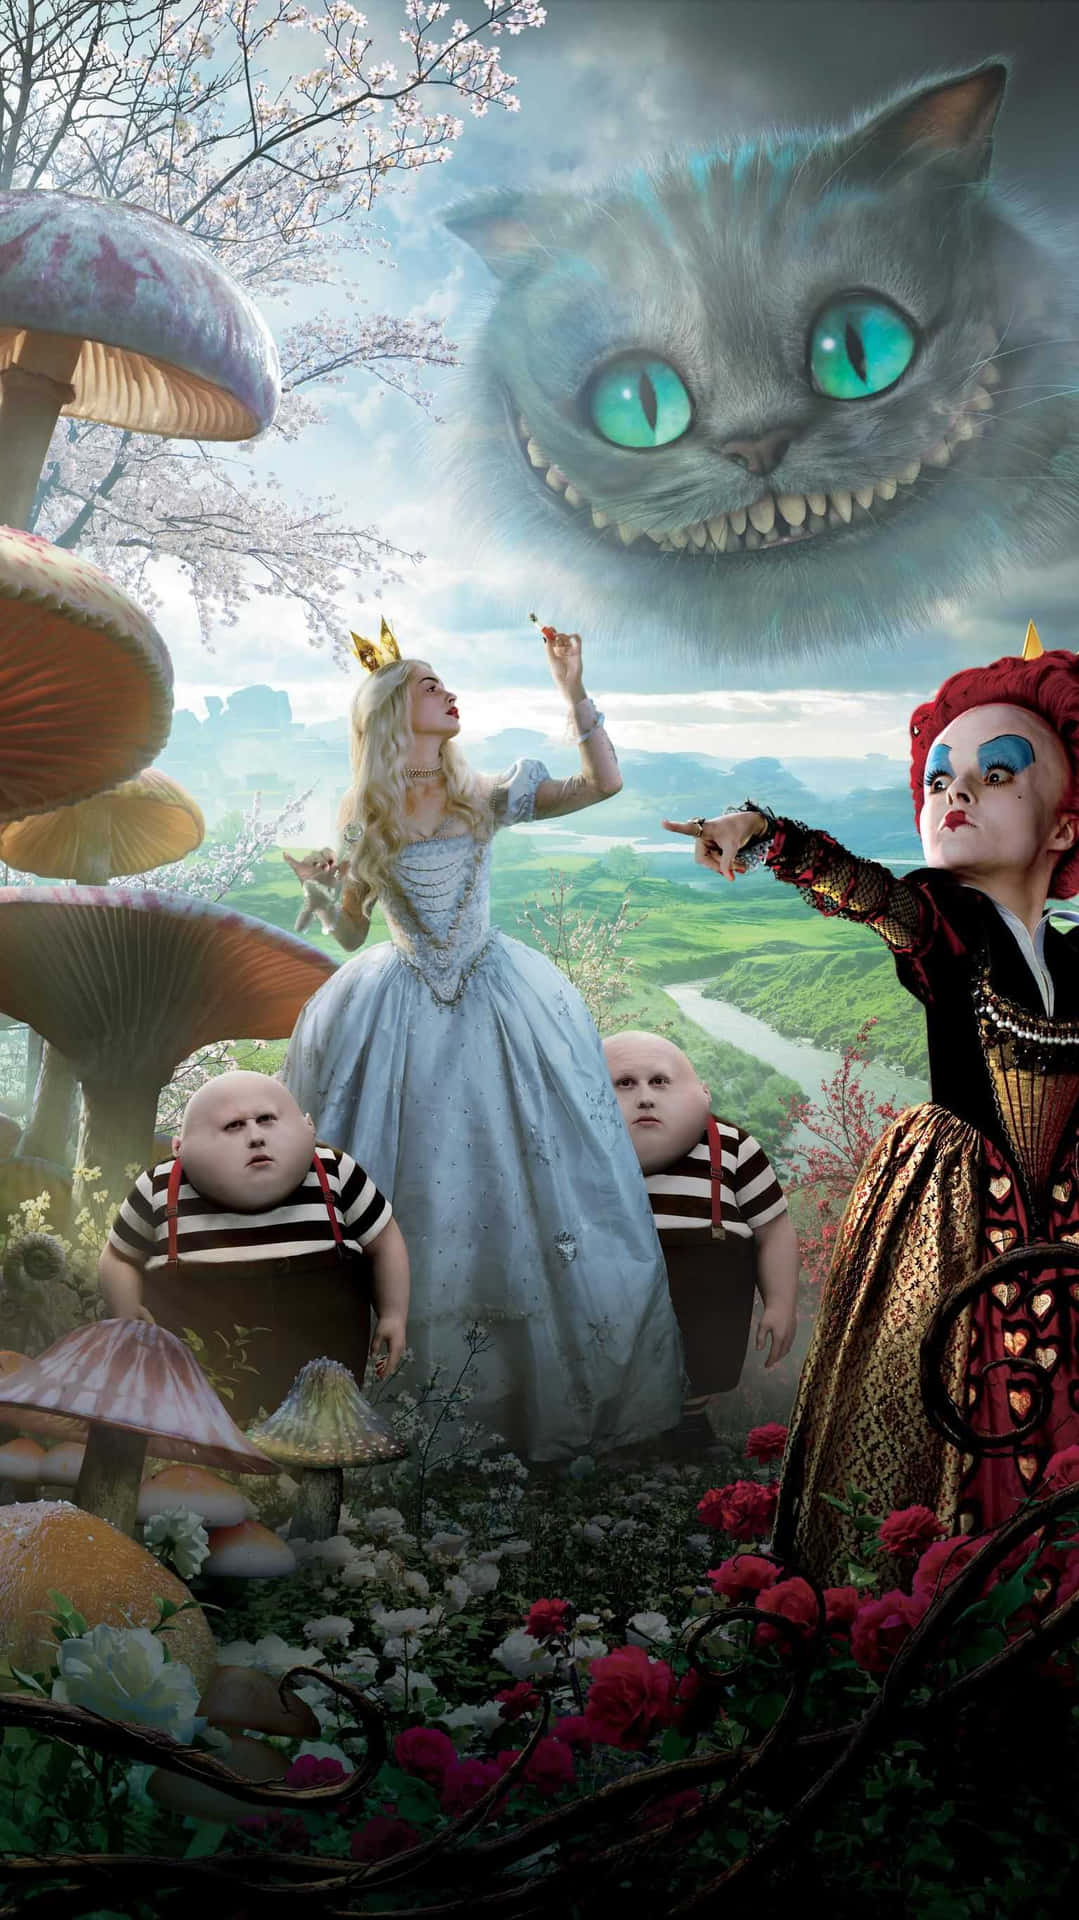 Alice in Wonderland - A World of Adventure and Imagination